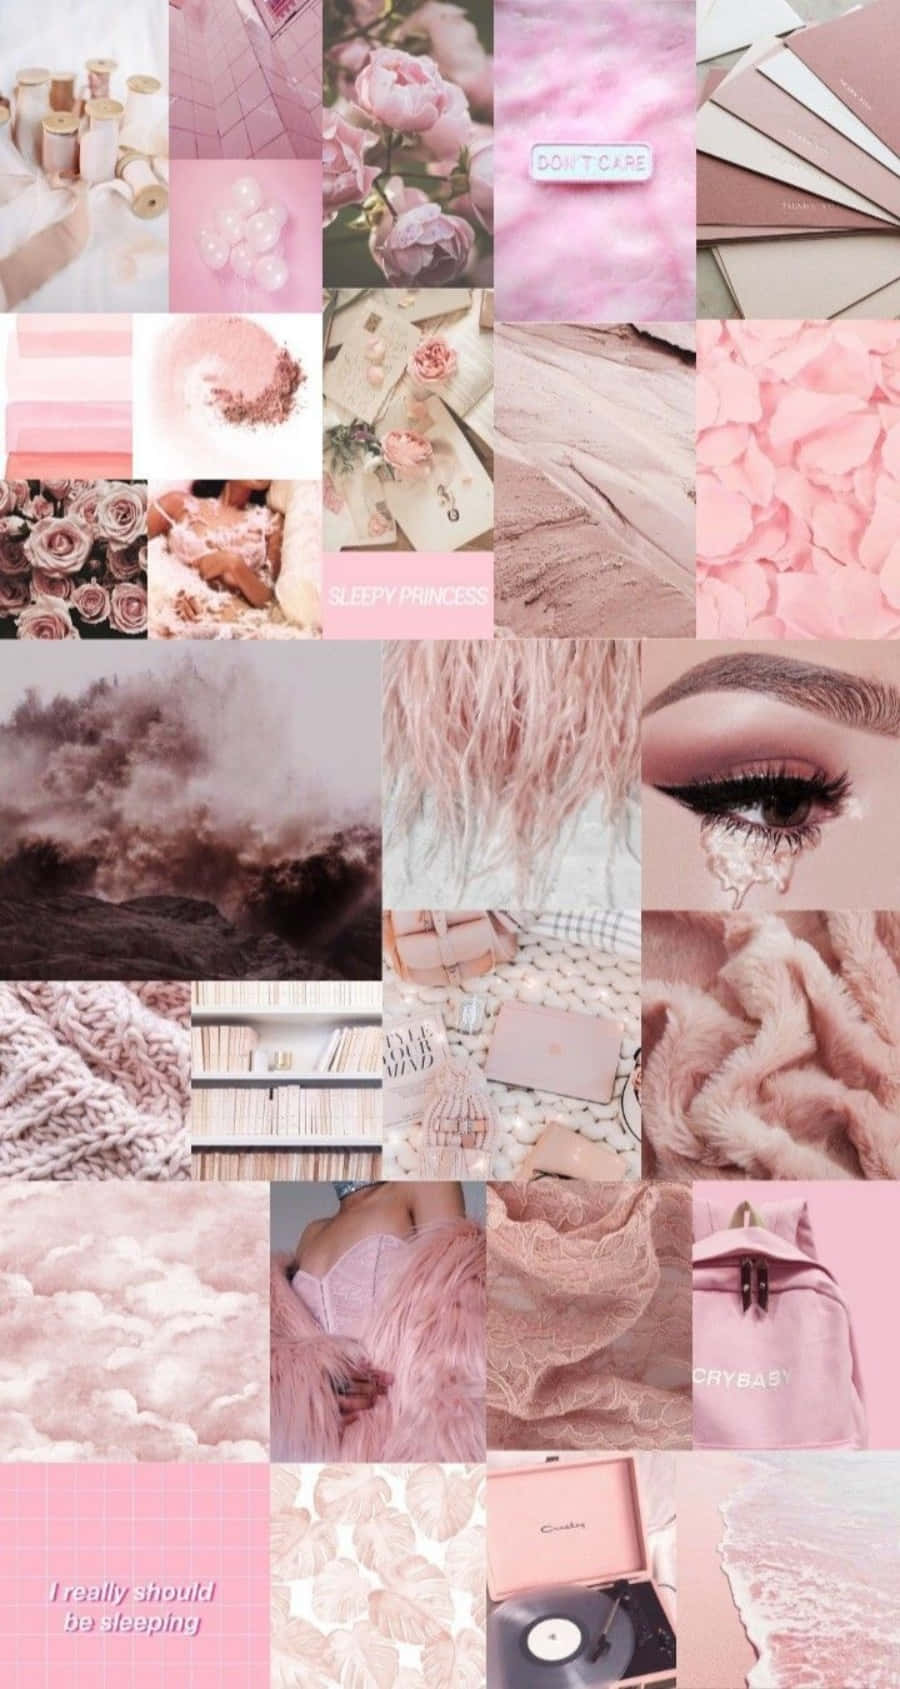 Aesthetic Pink Collage Abstract Shapes Wallpaper